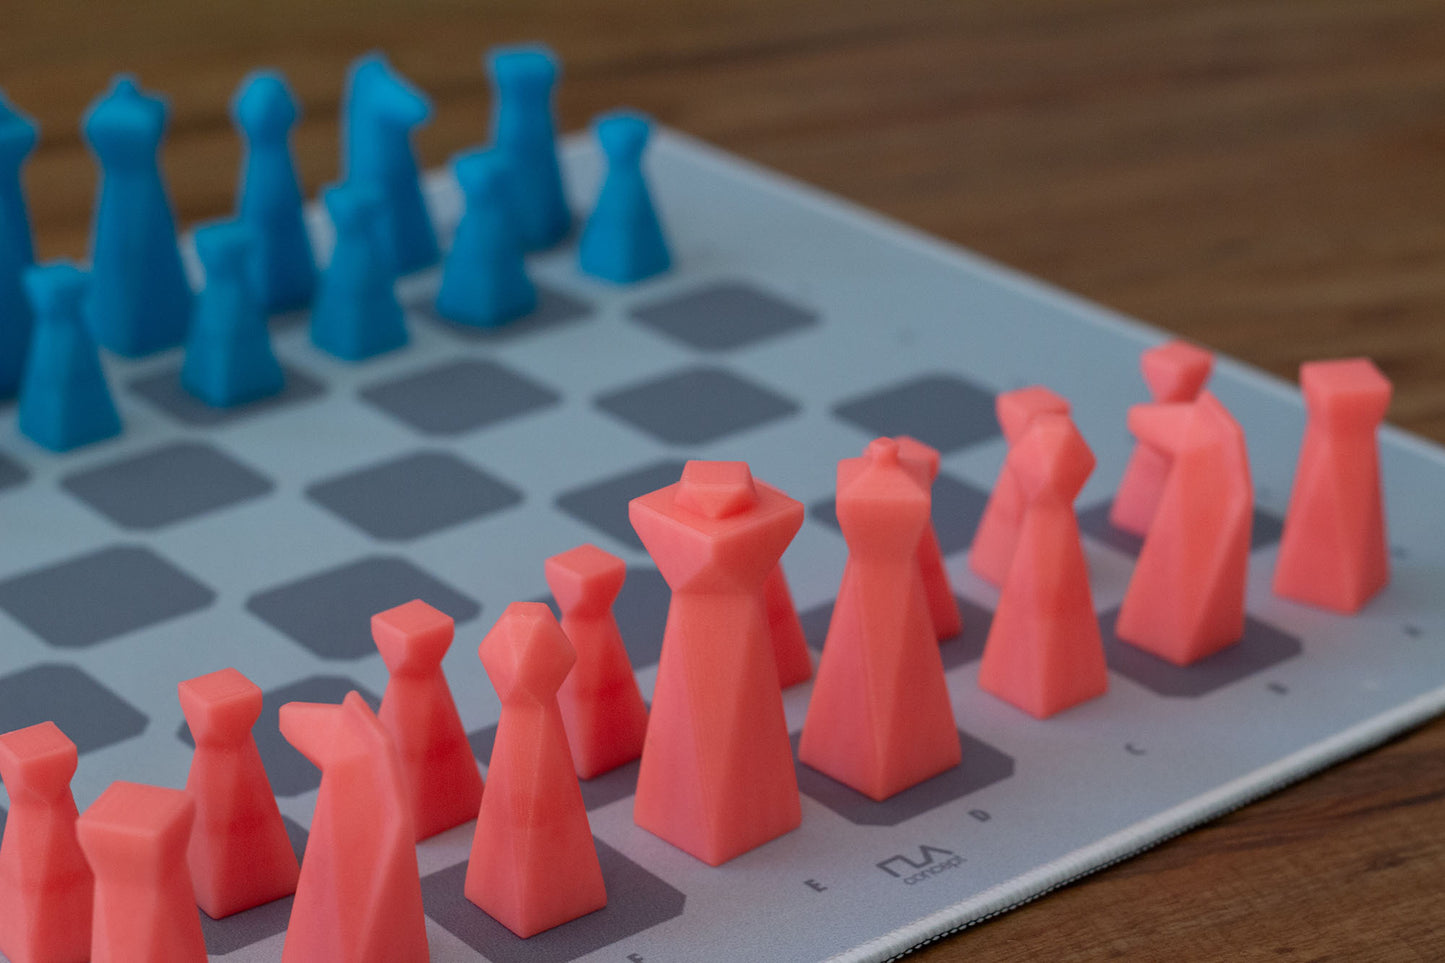 Roll-Up Chess Set